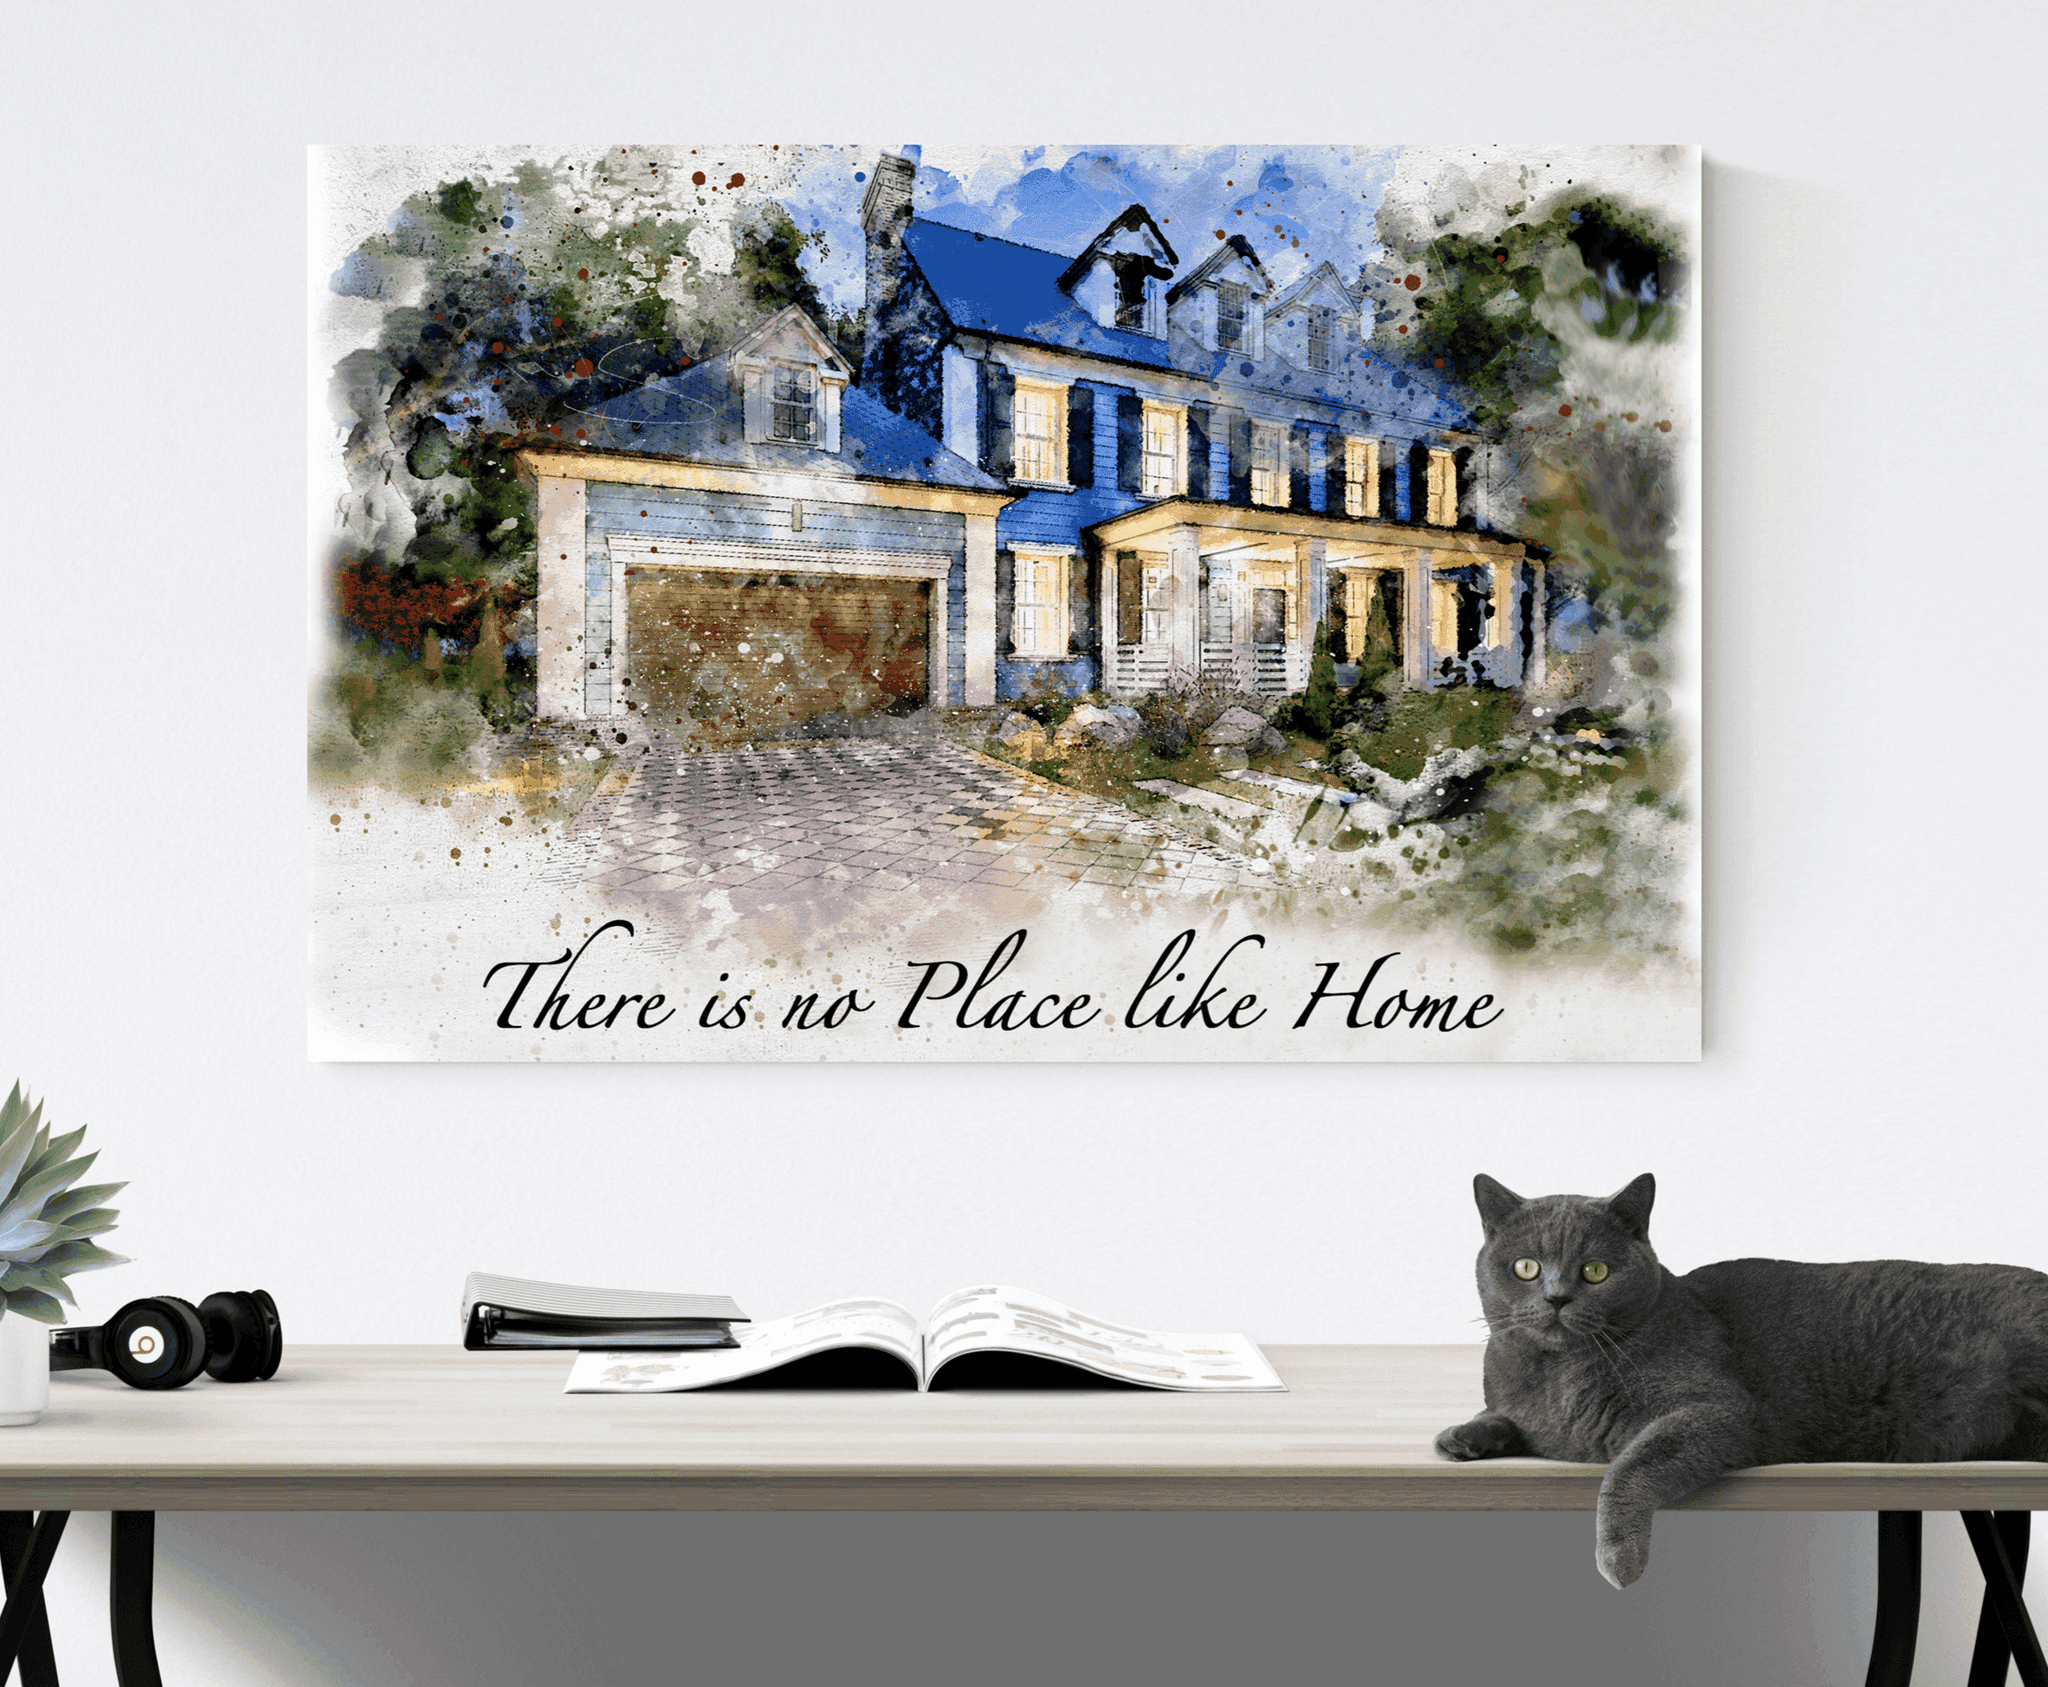 Order Your Custom House Painting in 5 Minutes. Follow the EASY Steps below - FromPicToArt